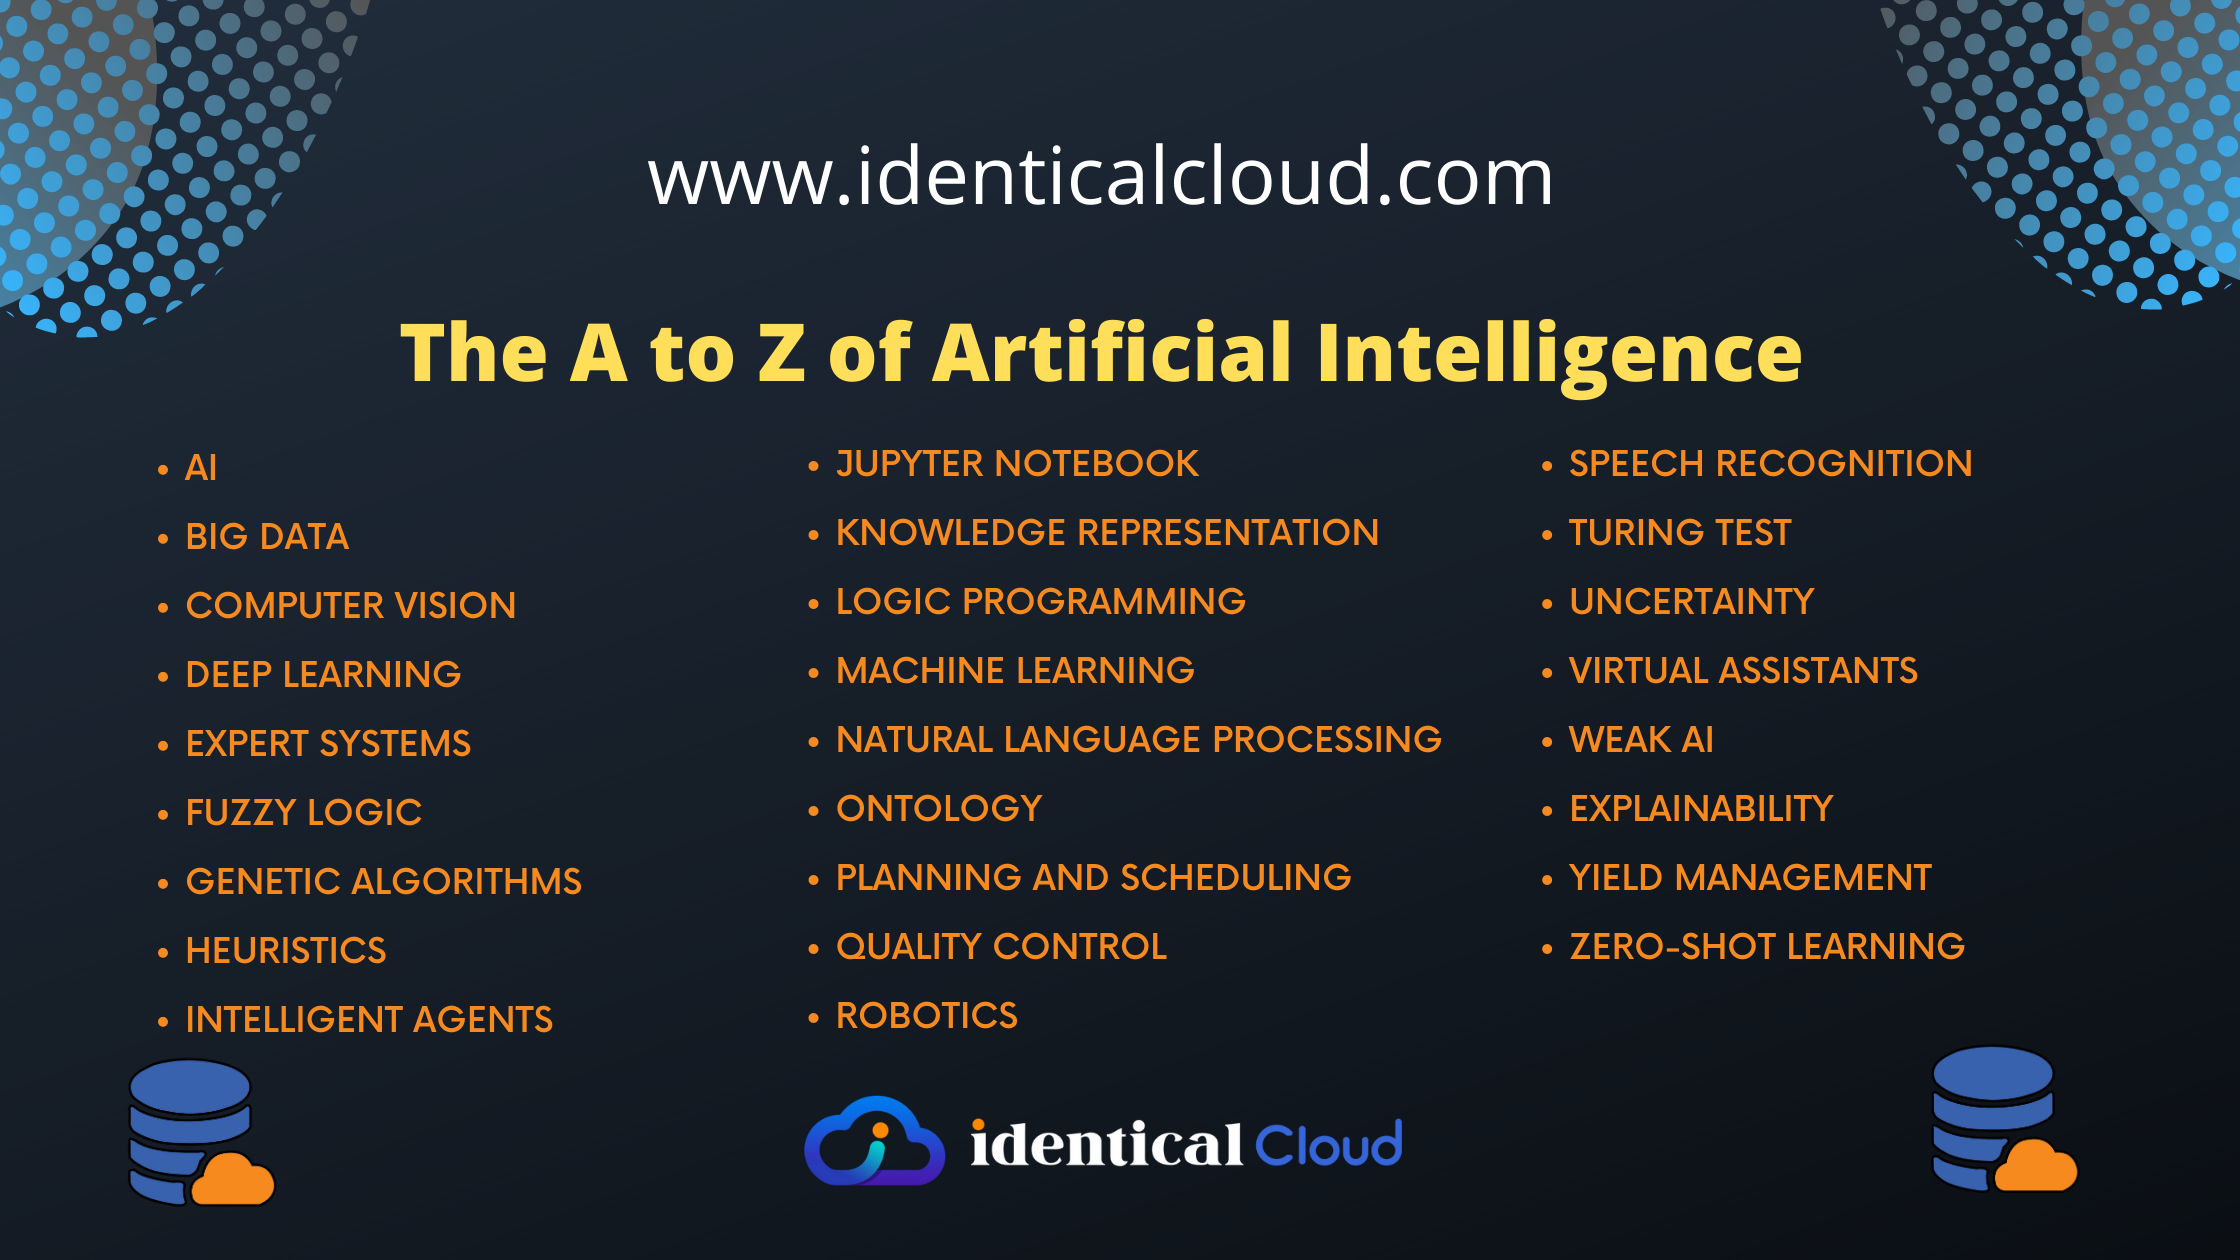 The A to Z of Artificial Intelligence